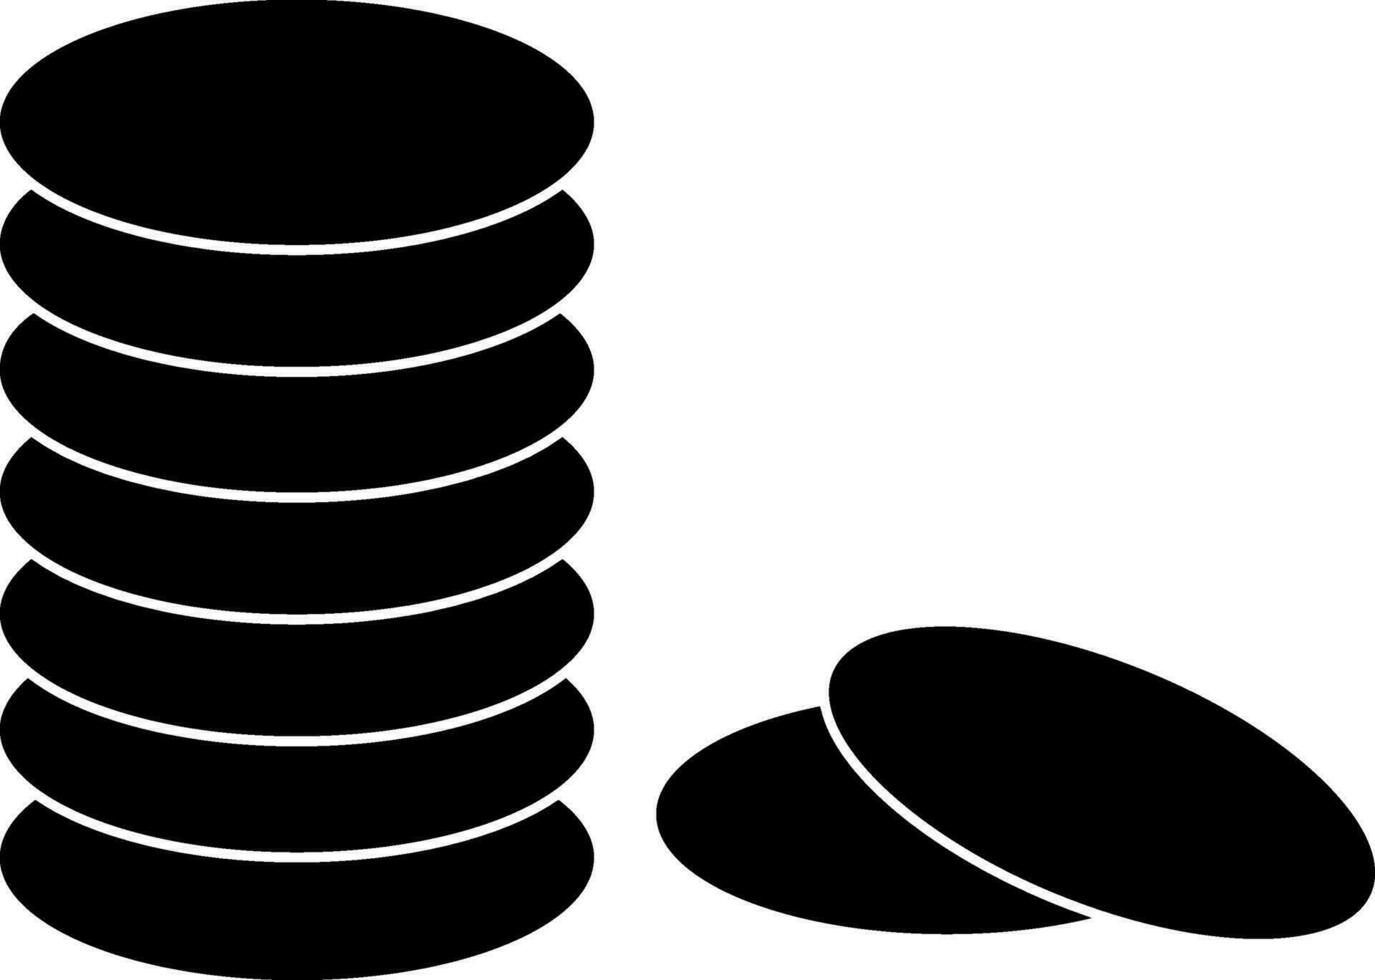 Money coins in black and white color. vector